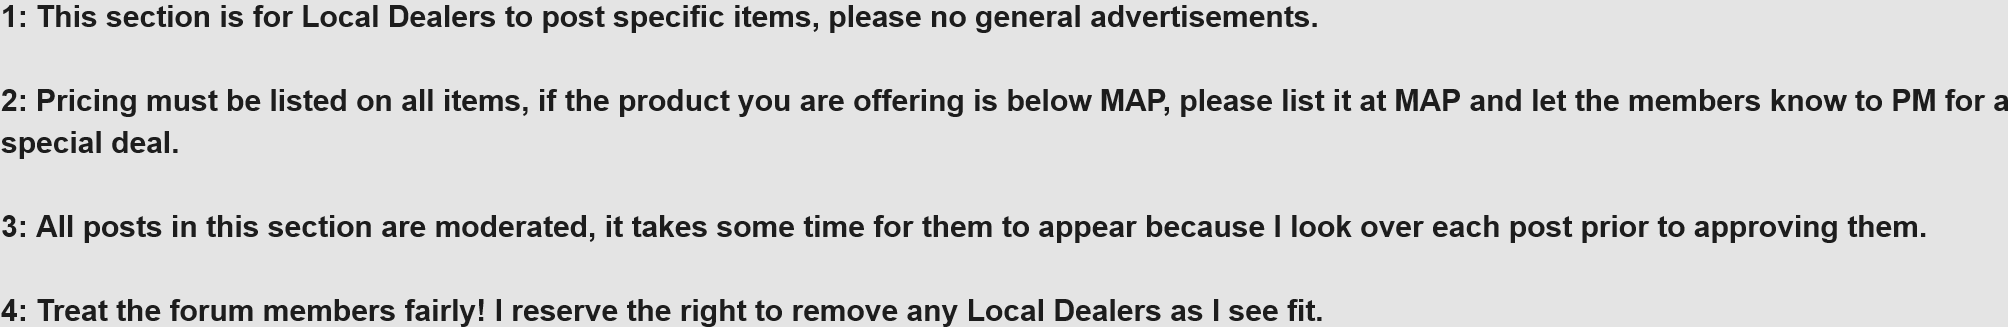 Screenshot 2021-09-23 at 14-49-18 Local Dealer Section Rules.png